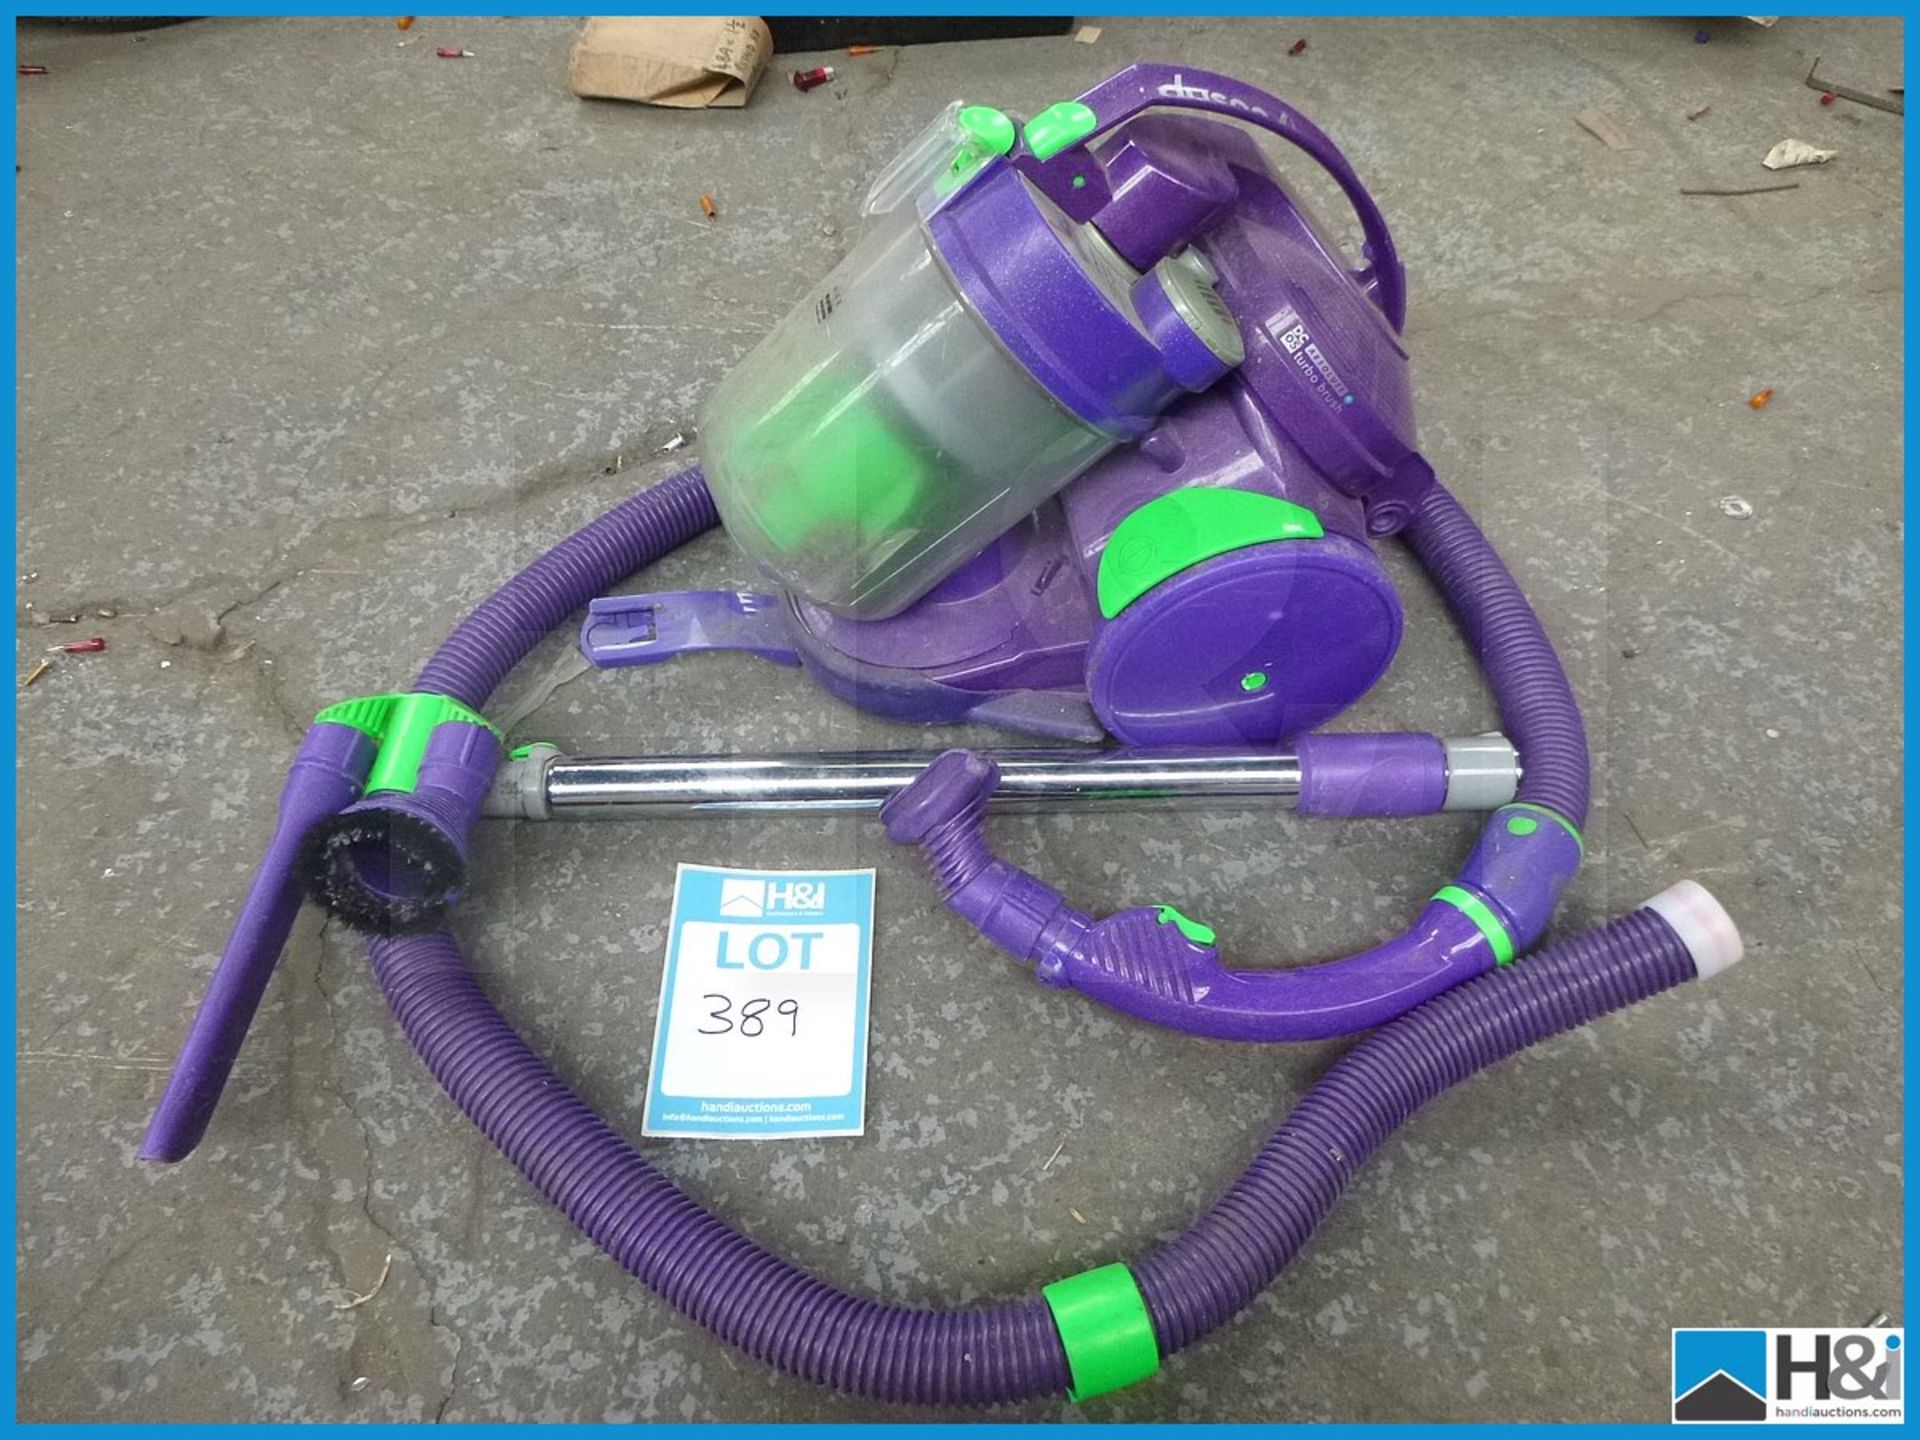 Dyson Vacuum Cleaner, Used, Not Checked Appraisal: Viewing Essential Serial No: NA Location: